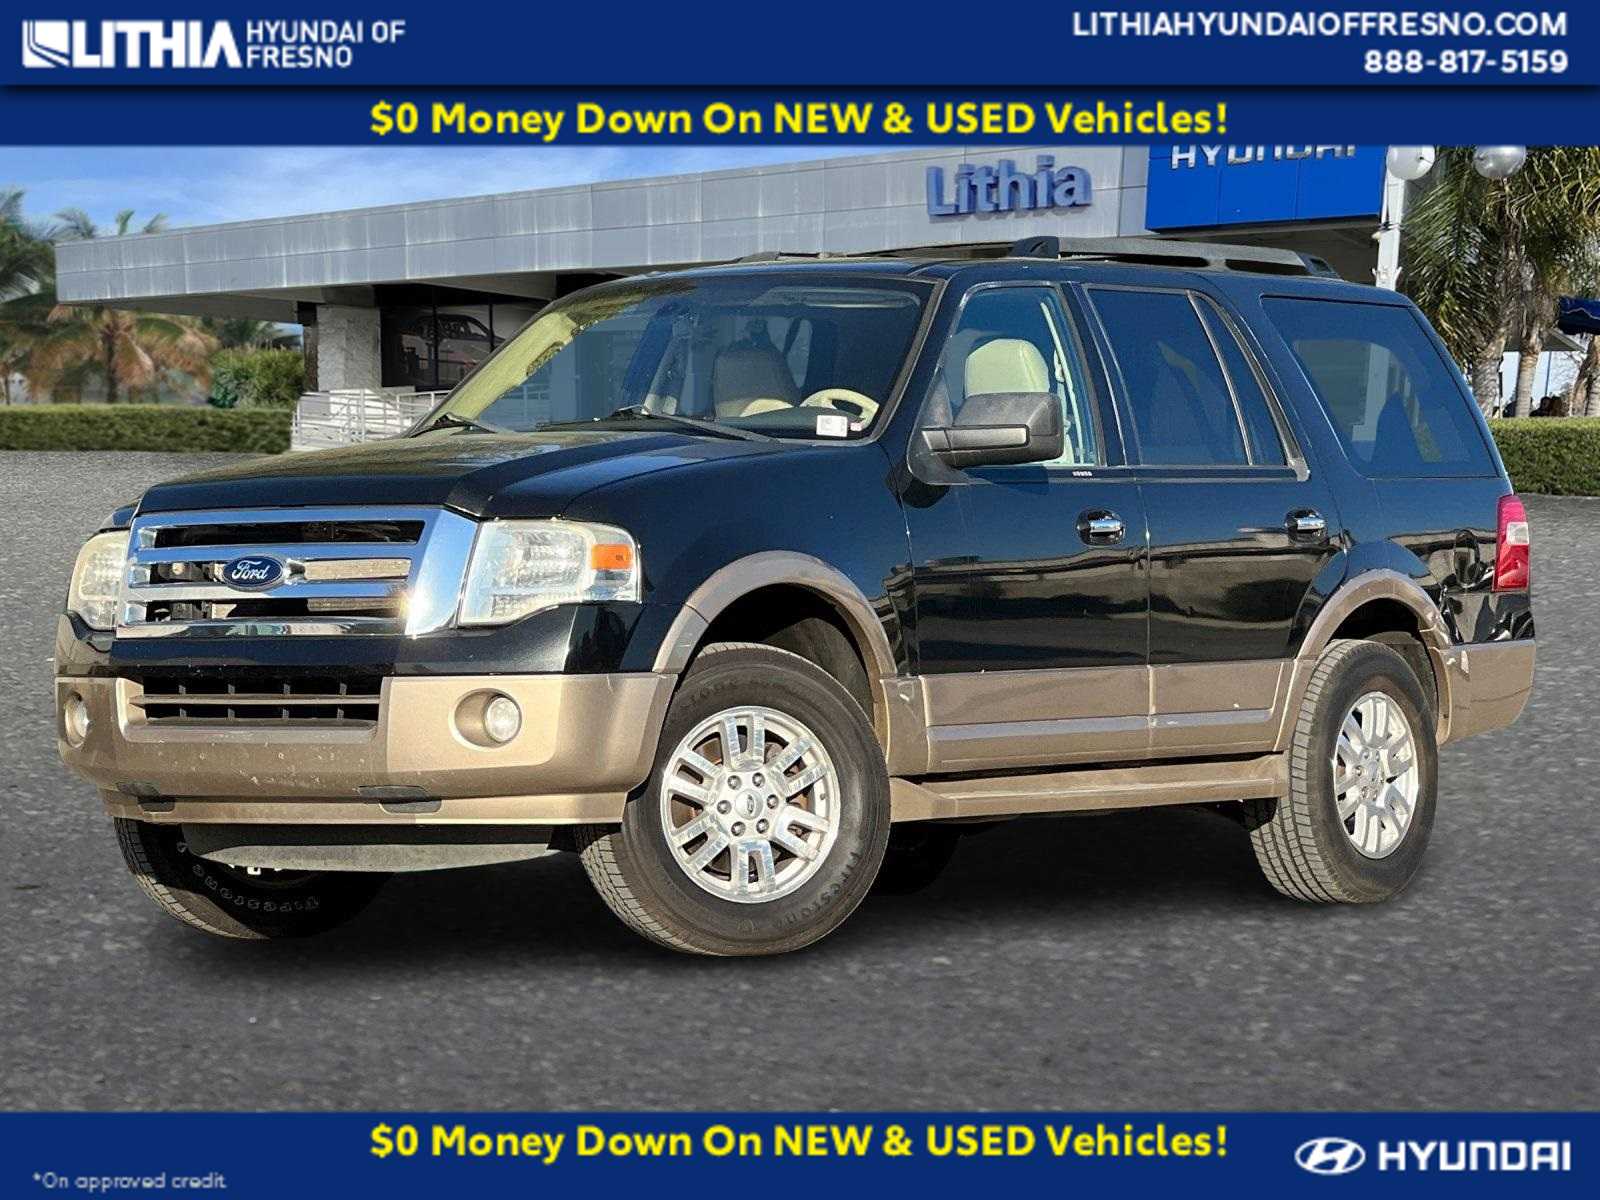 2013 Ford Expedition XLT Hero Image